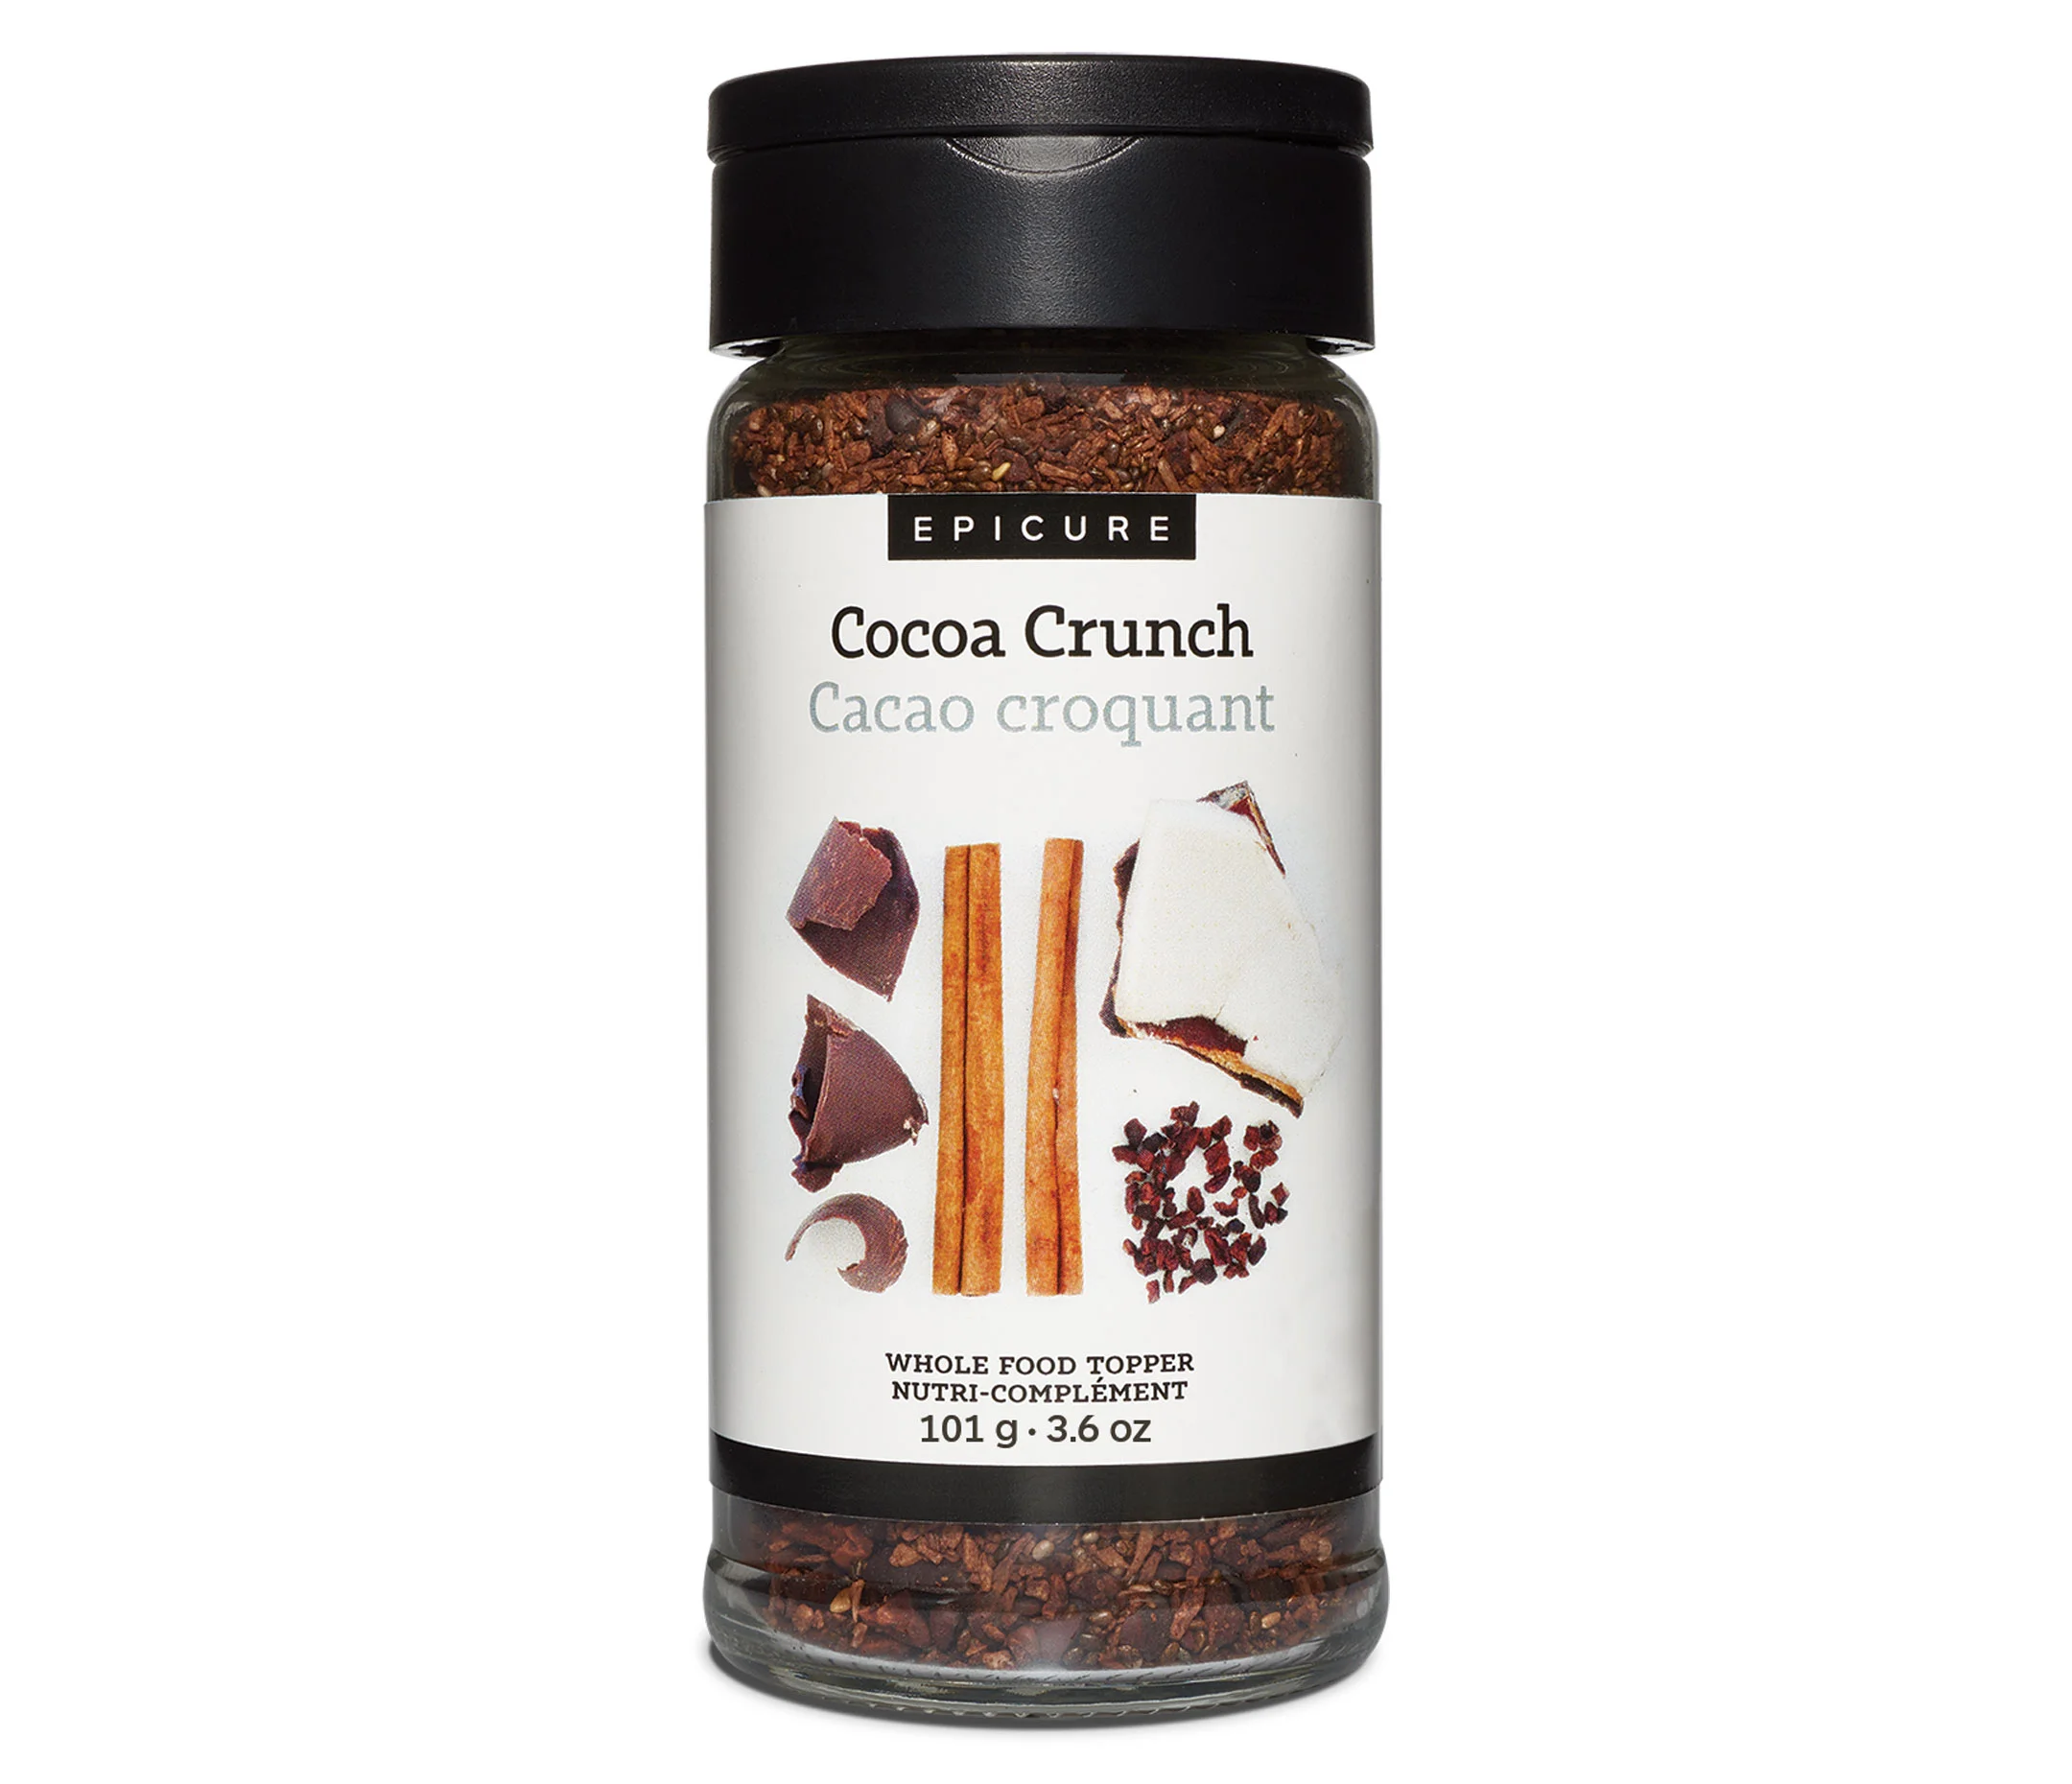 Cocoa Crunch Whole Food Topper